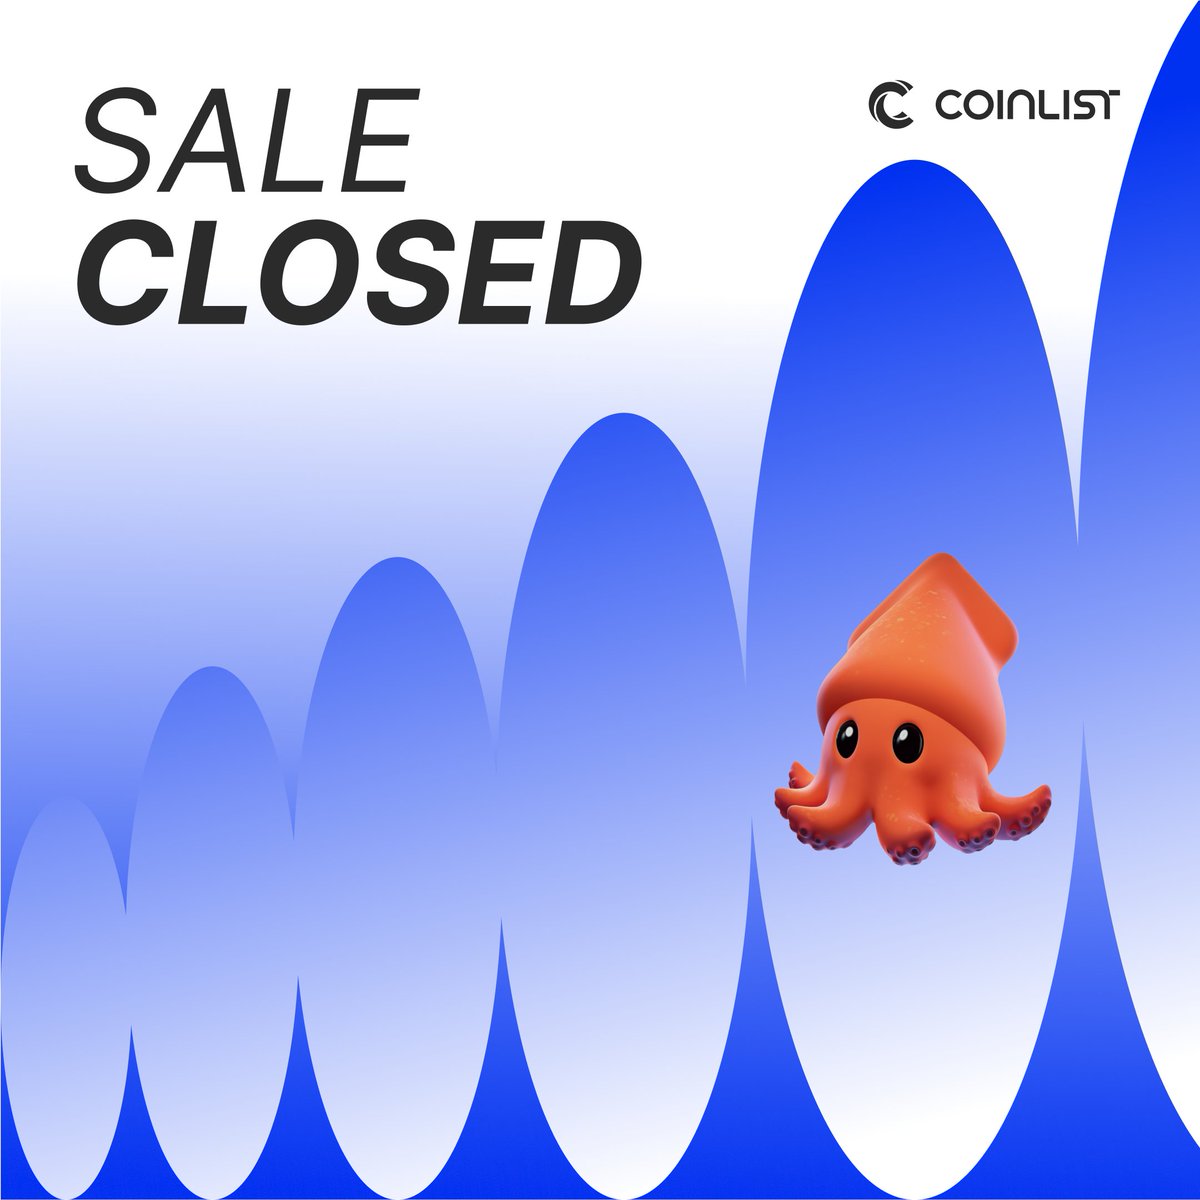 THE FASTEST SALE EVER ON COINLIST The SQD sale on @CoinList, including the additional allocation, has just sold out in 19 minutes. Thank you to our amazing community for the incredible support.